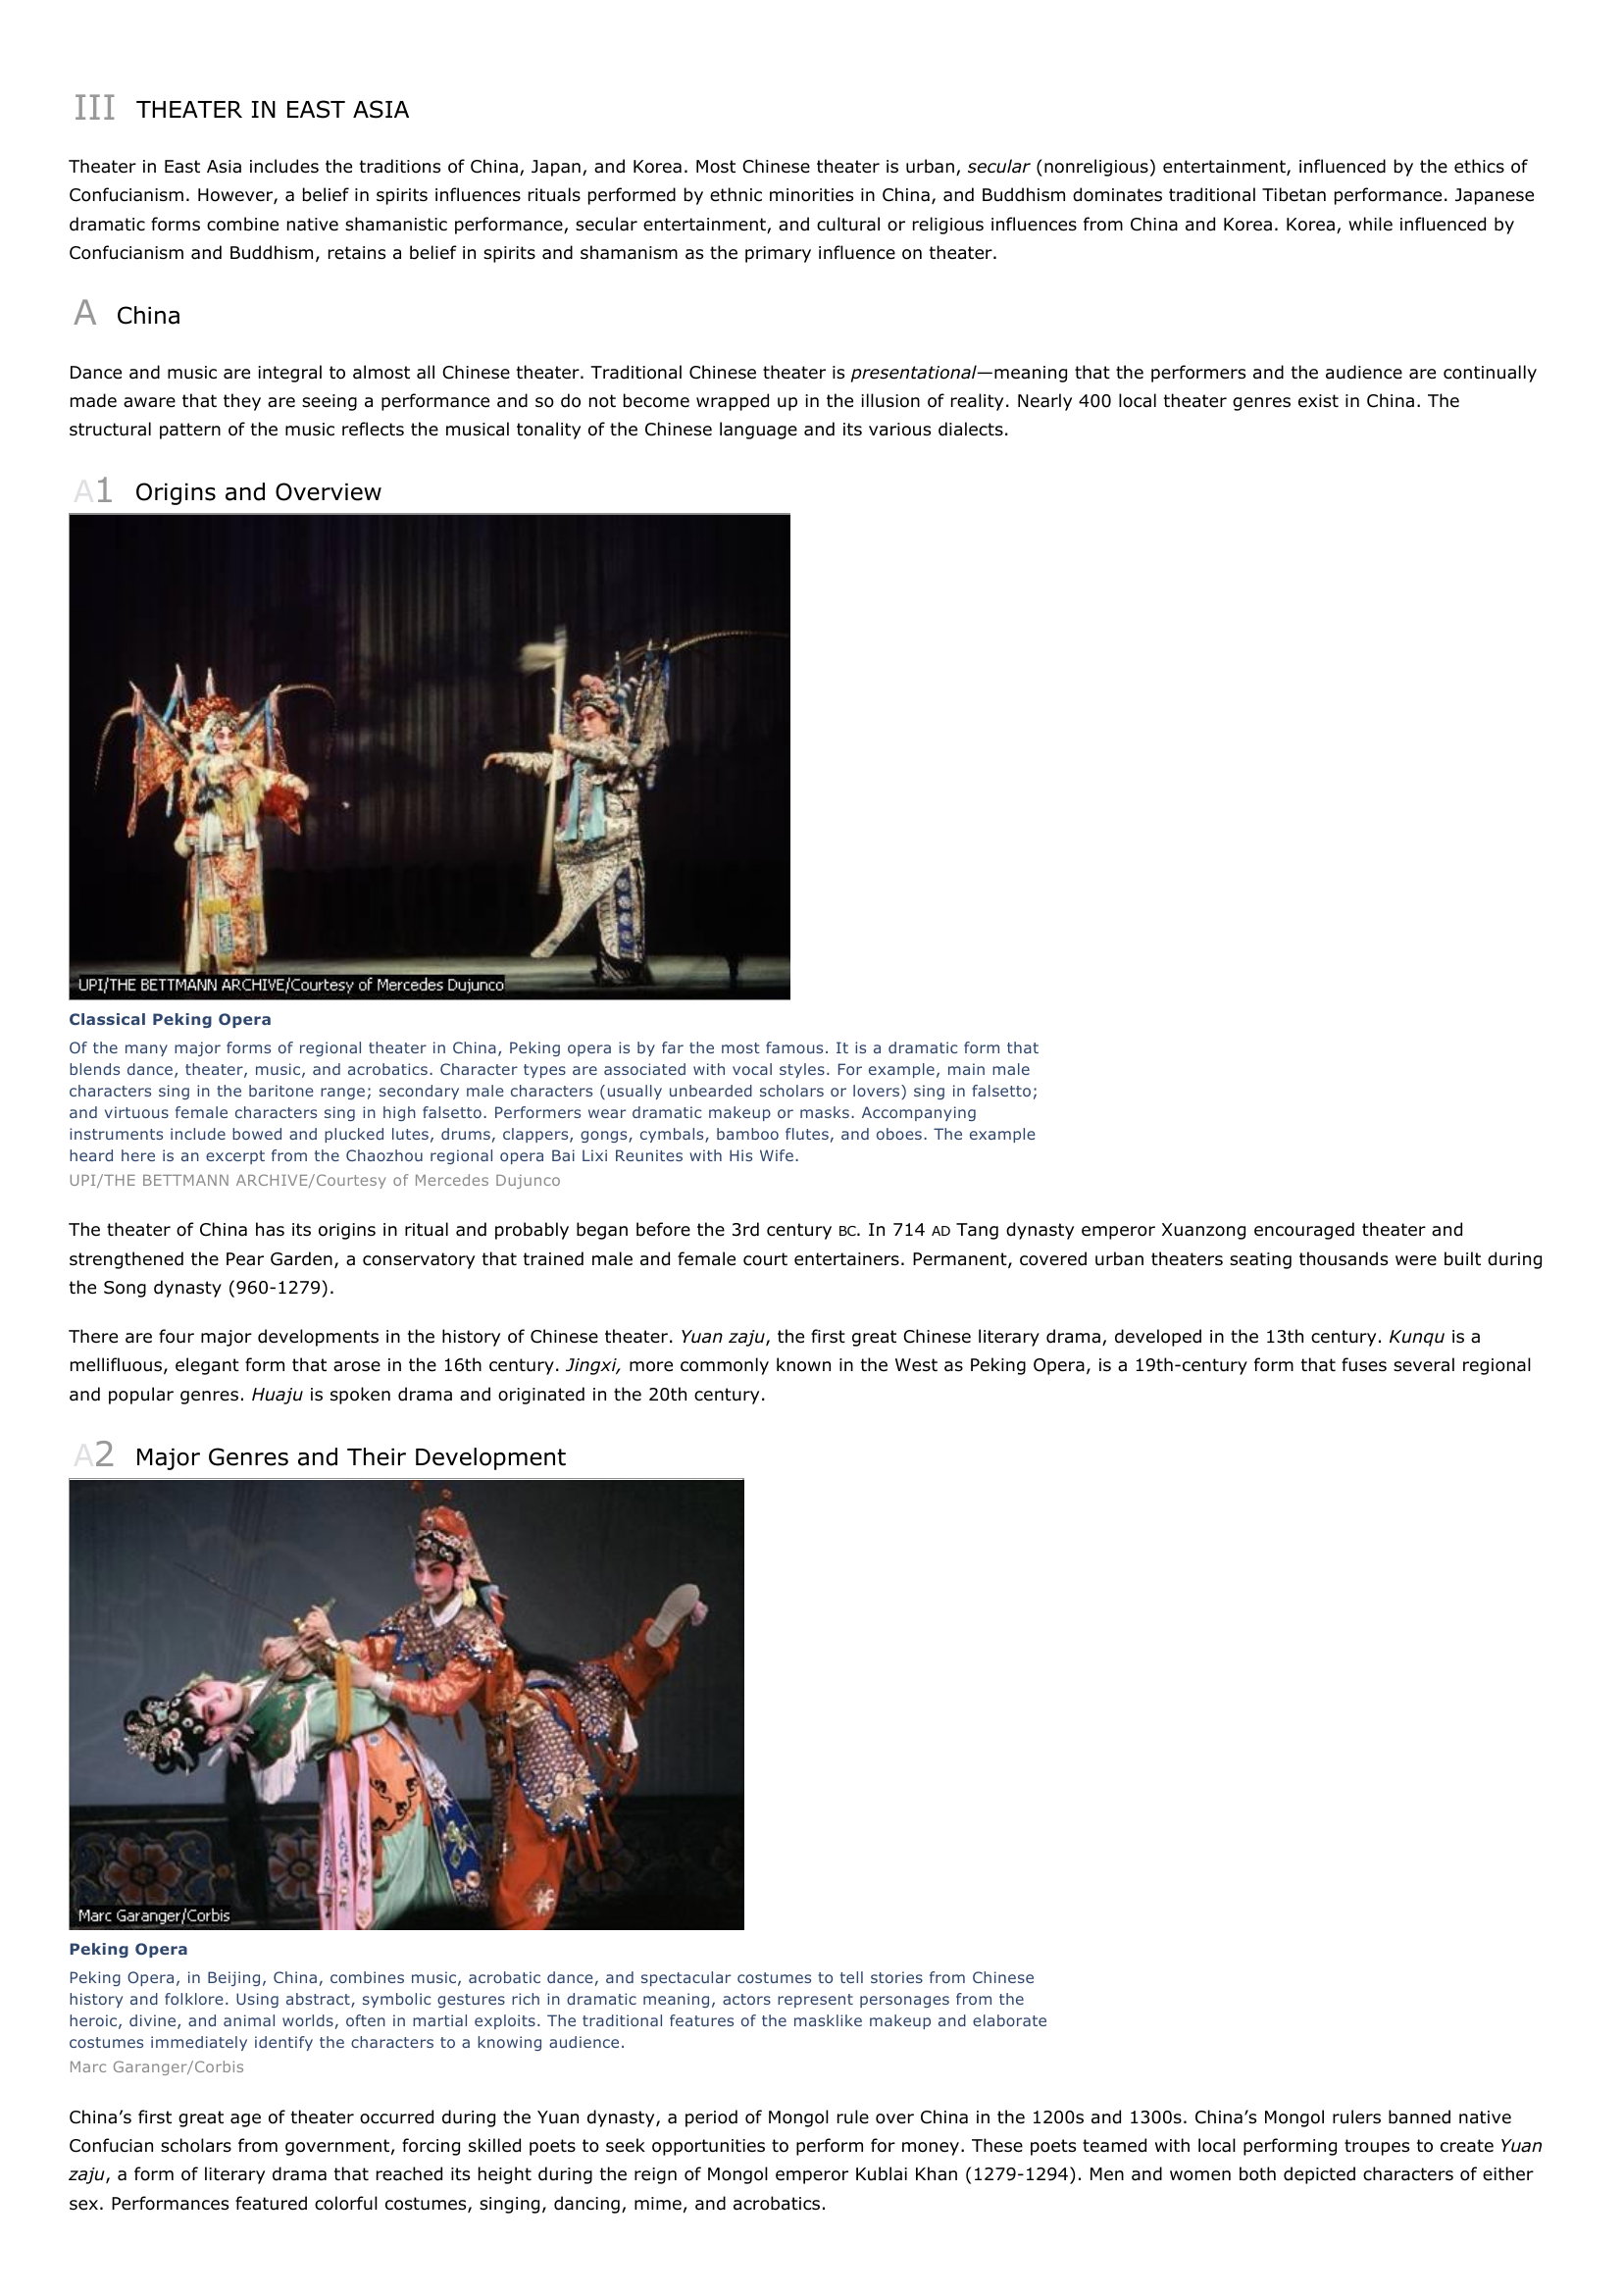 Prévisualisation du document Asian Theater
I

INTRODUCTION

Asian Theater, live performance, featuring actors or puppets, native to Asia, a continent with more than 2 billion people of many nations and cultures.